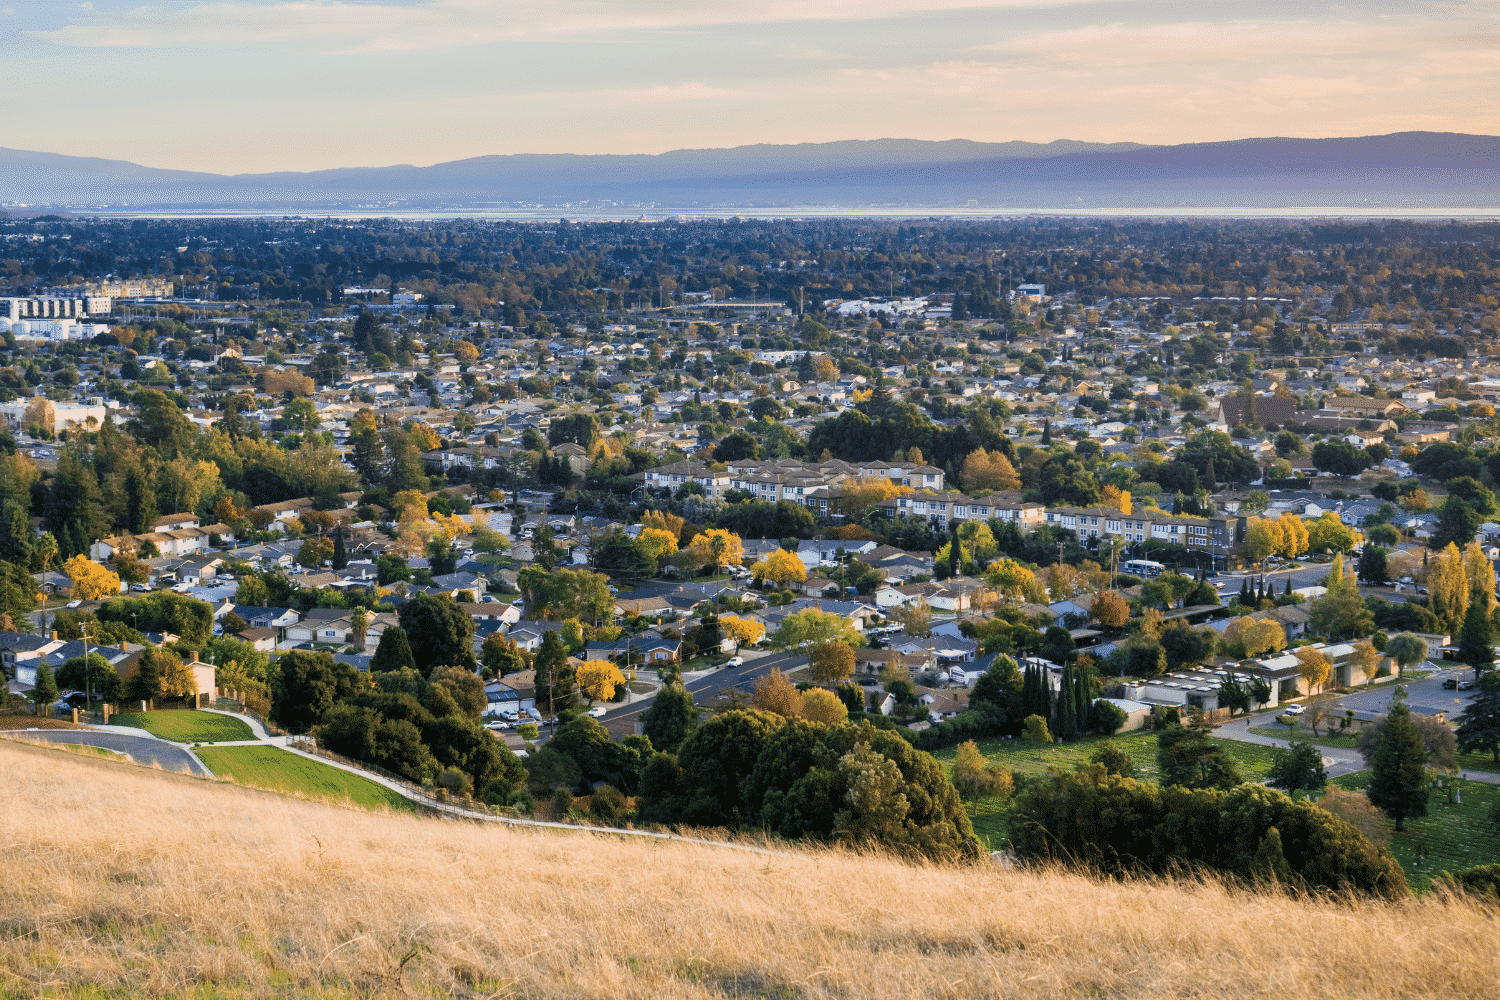 View overlooking the city of Fremont, California